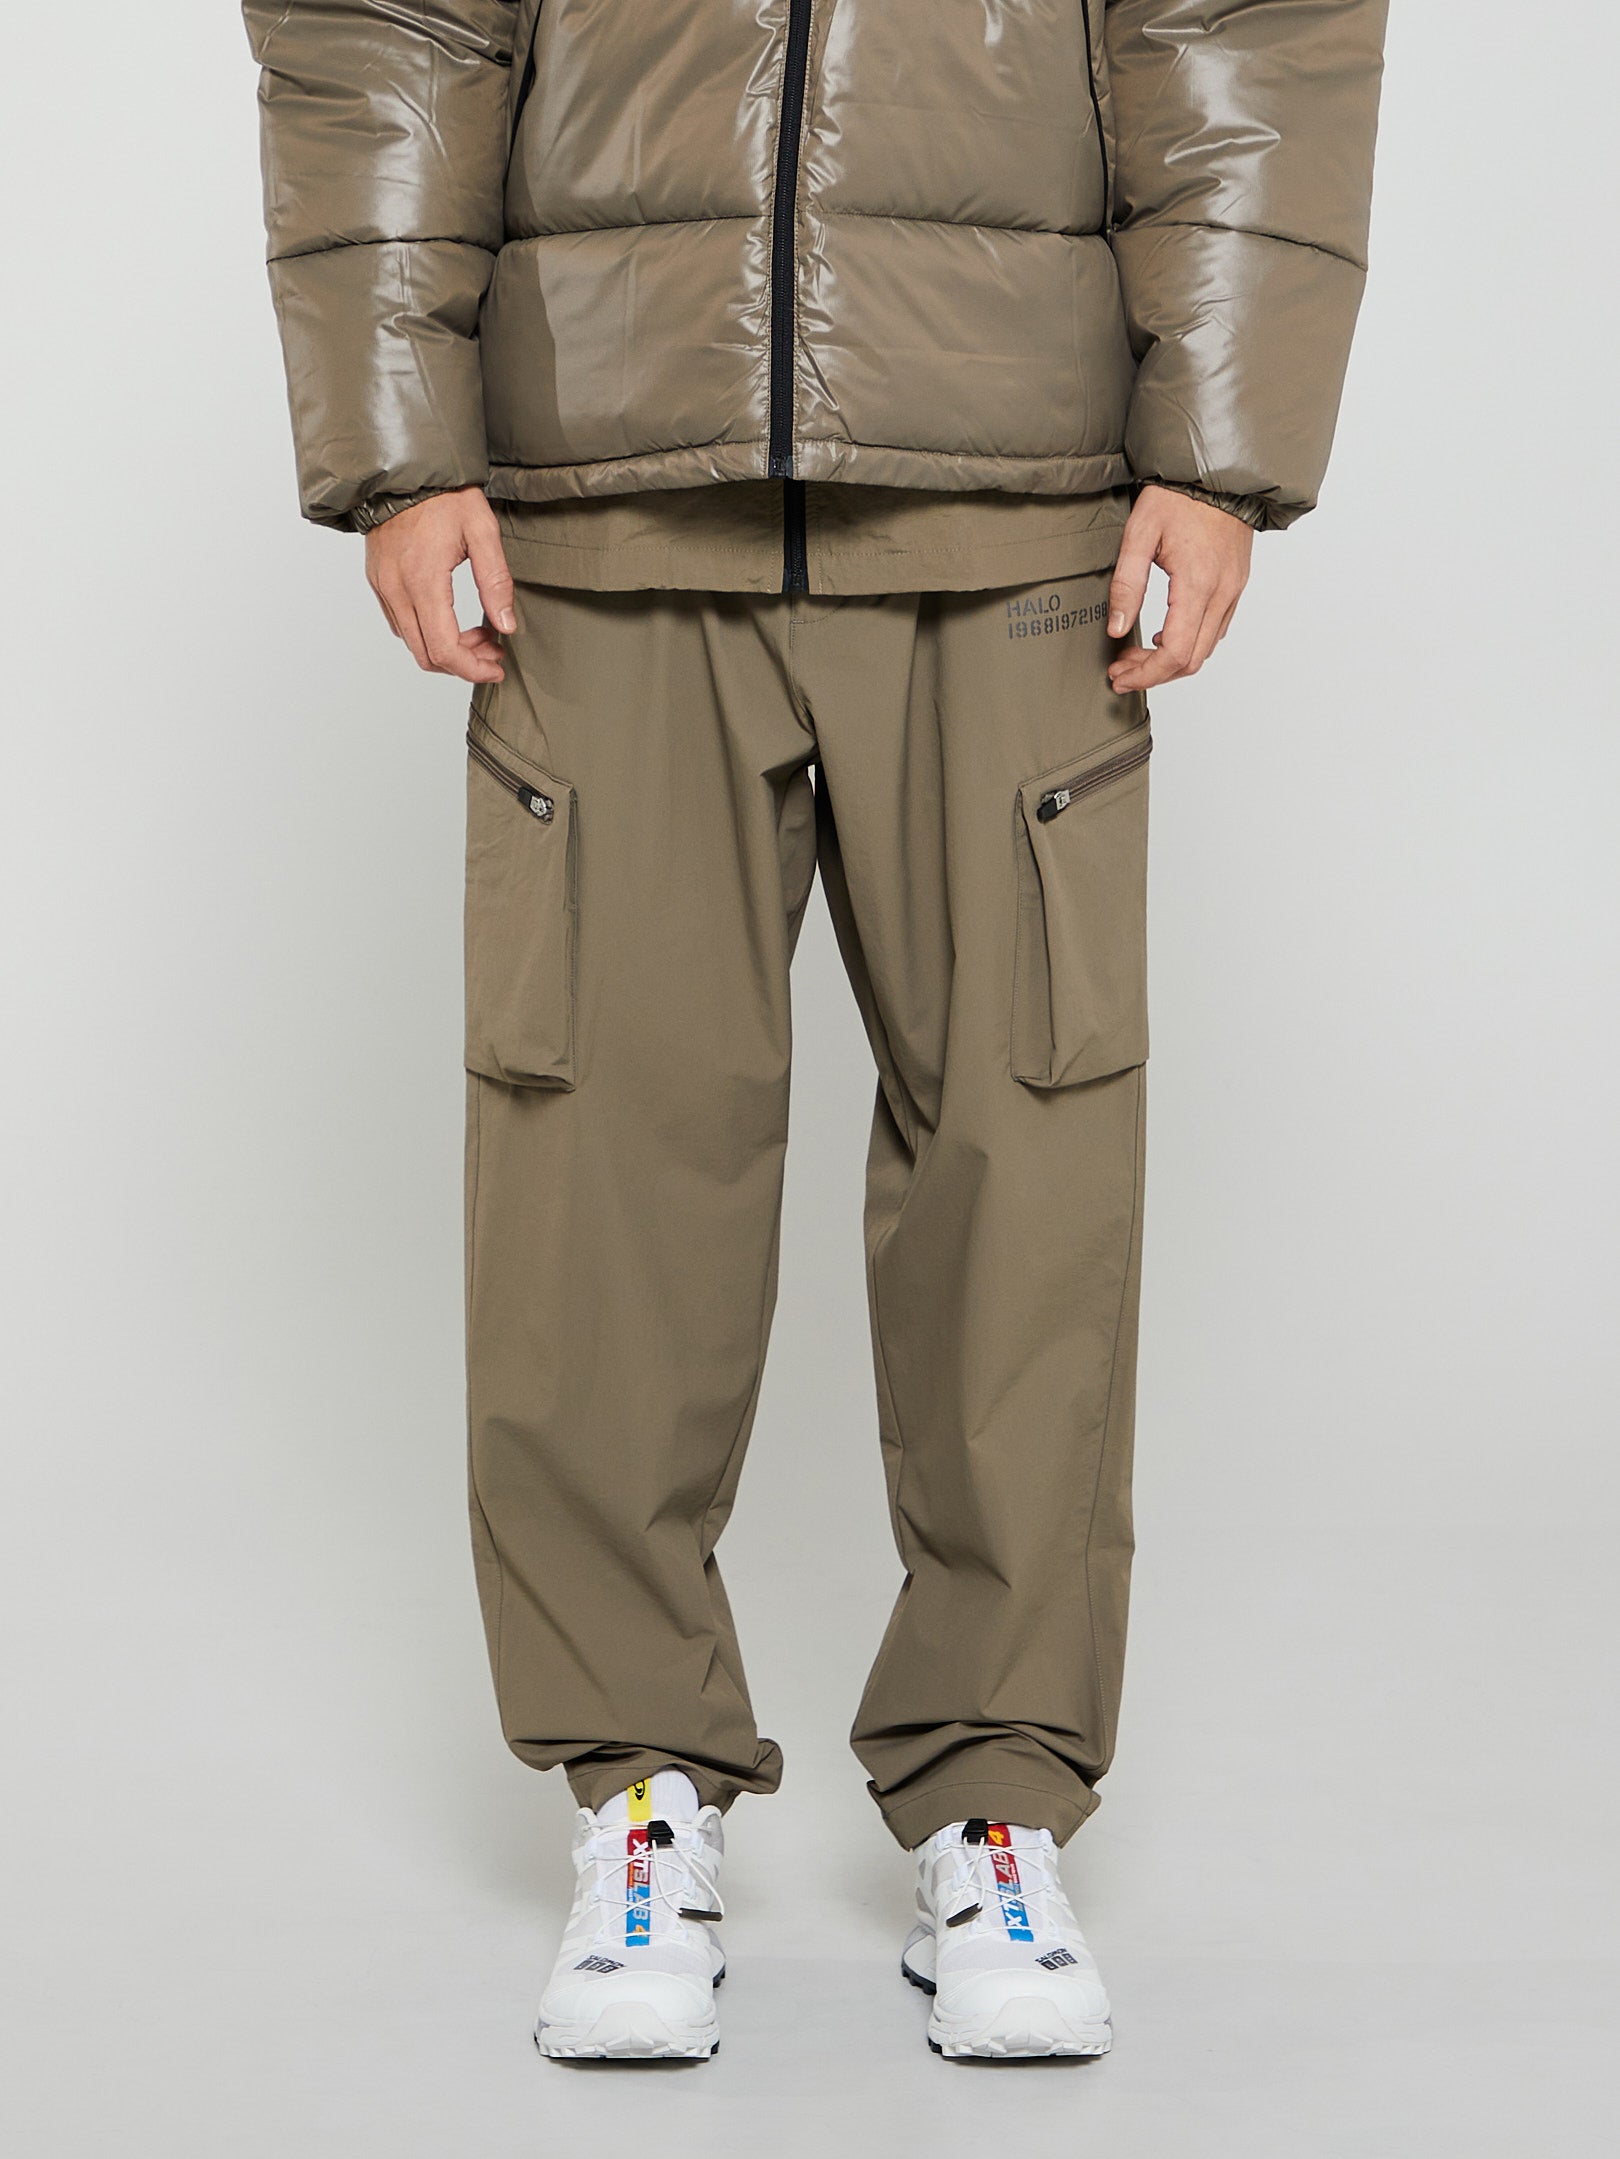 Halo - Trail Pants in Morel